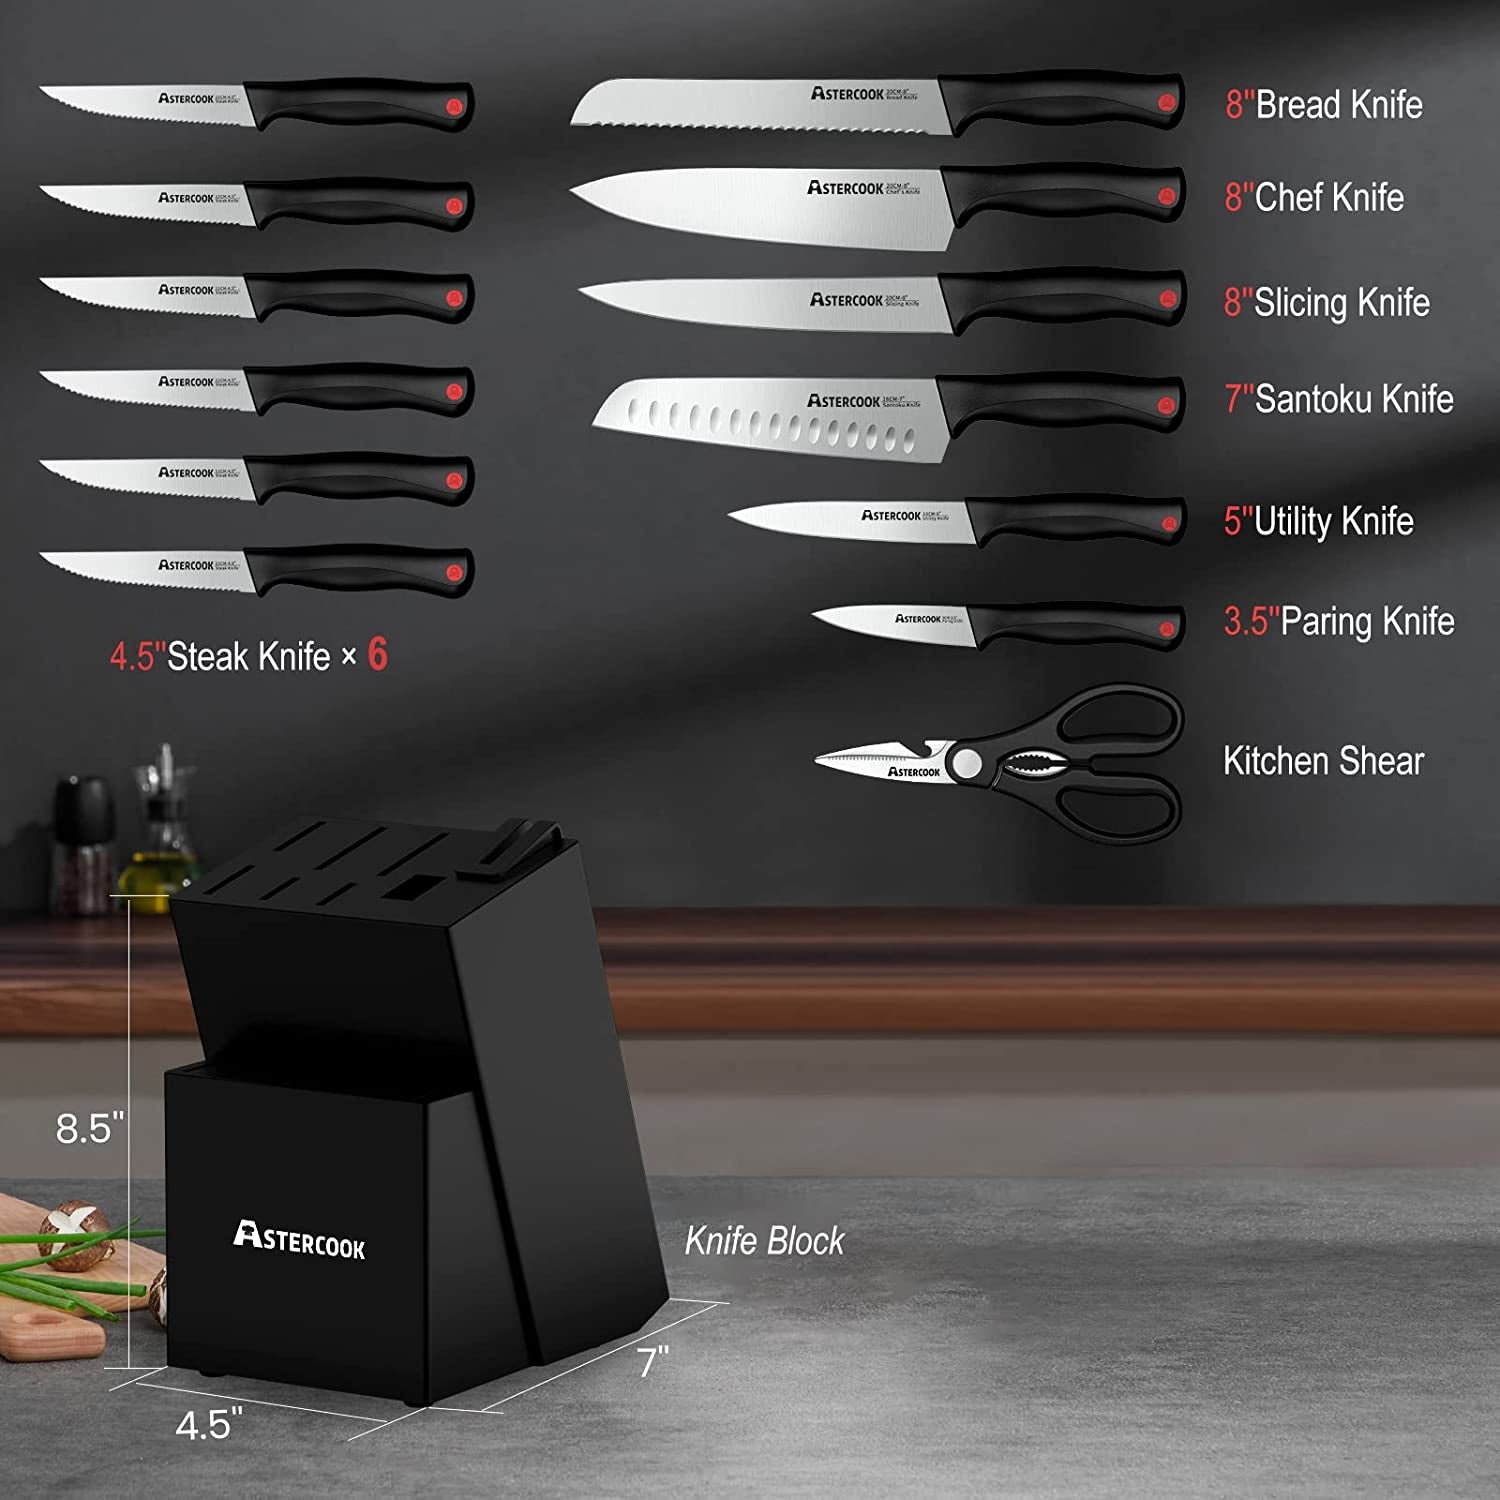 KD 15 Pcs High Carbon Stainless Steel Block Knife Set with Self Sharpening and 6 Steak Knives, Black